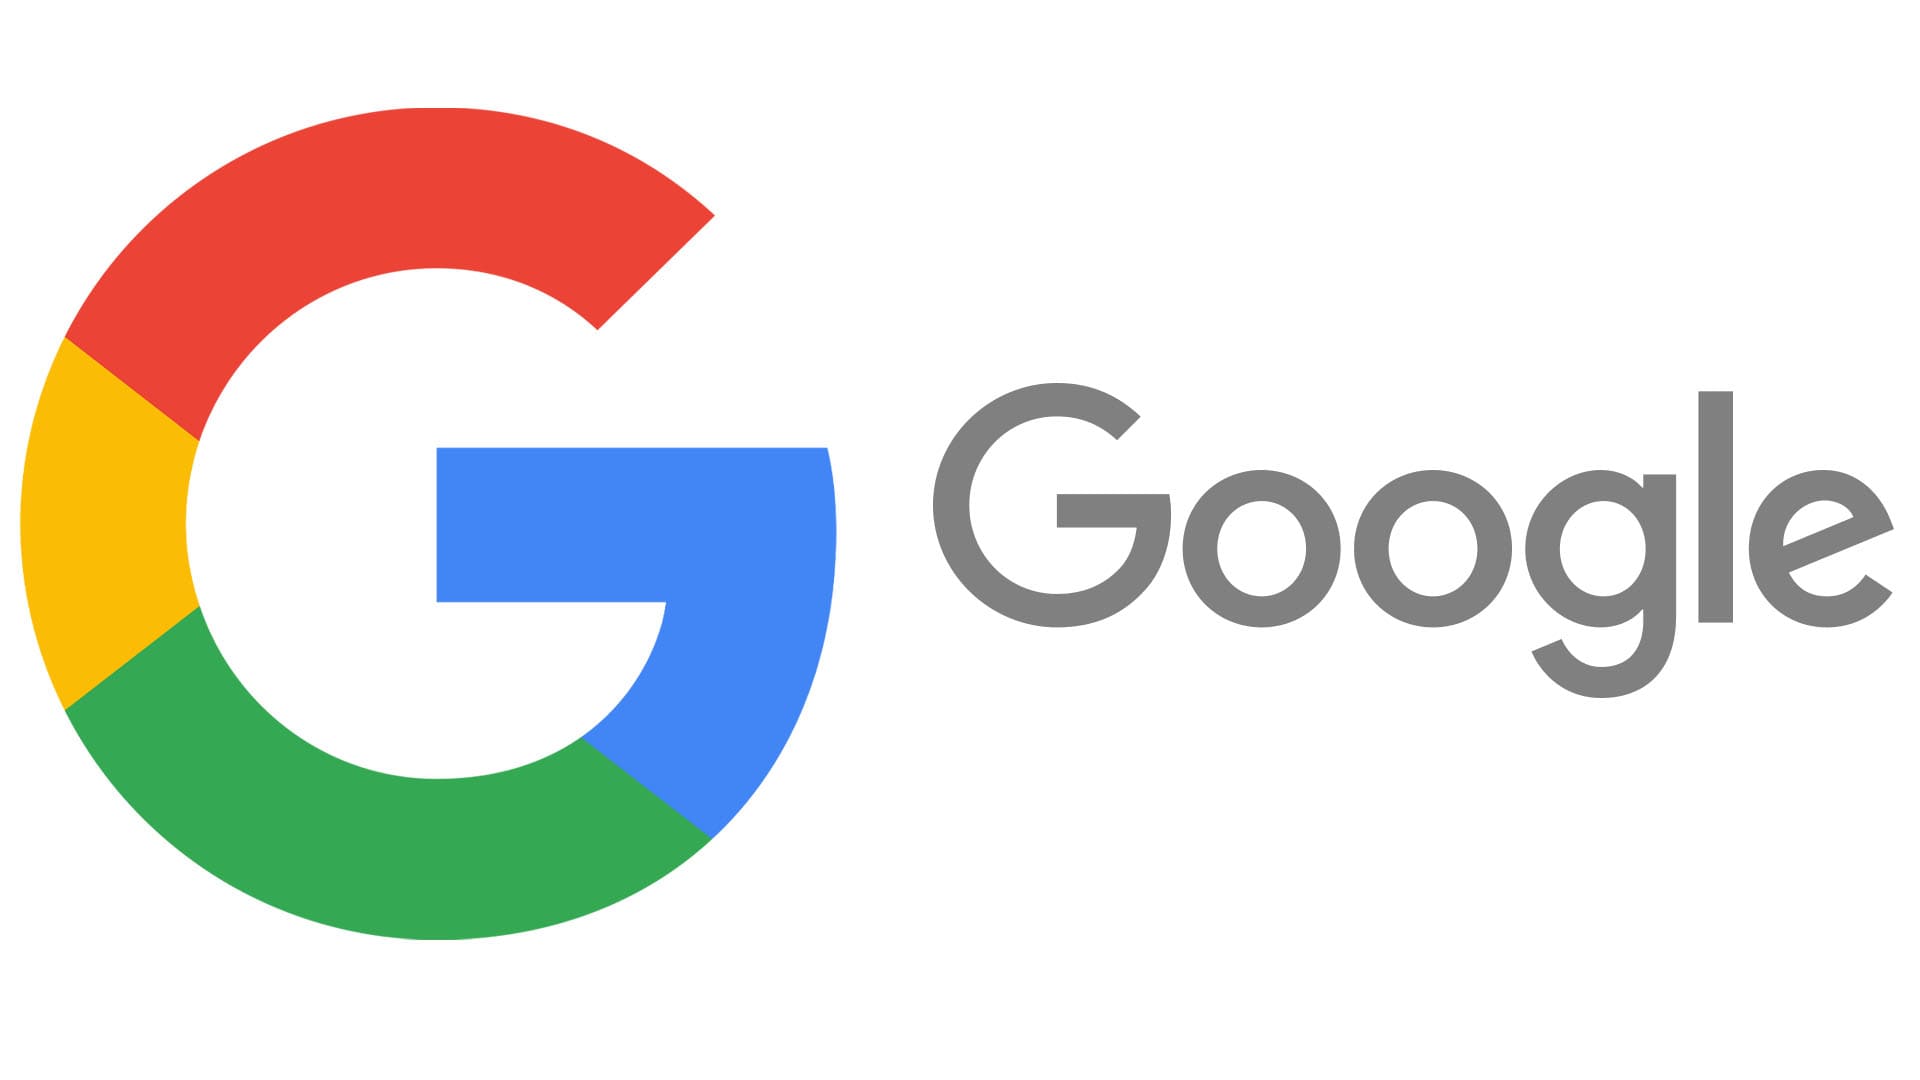 Google And Match Group Resolve Antitrust Case With Settlement Agreement